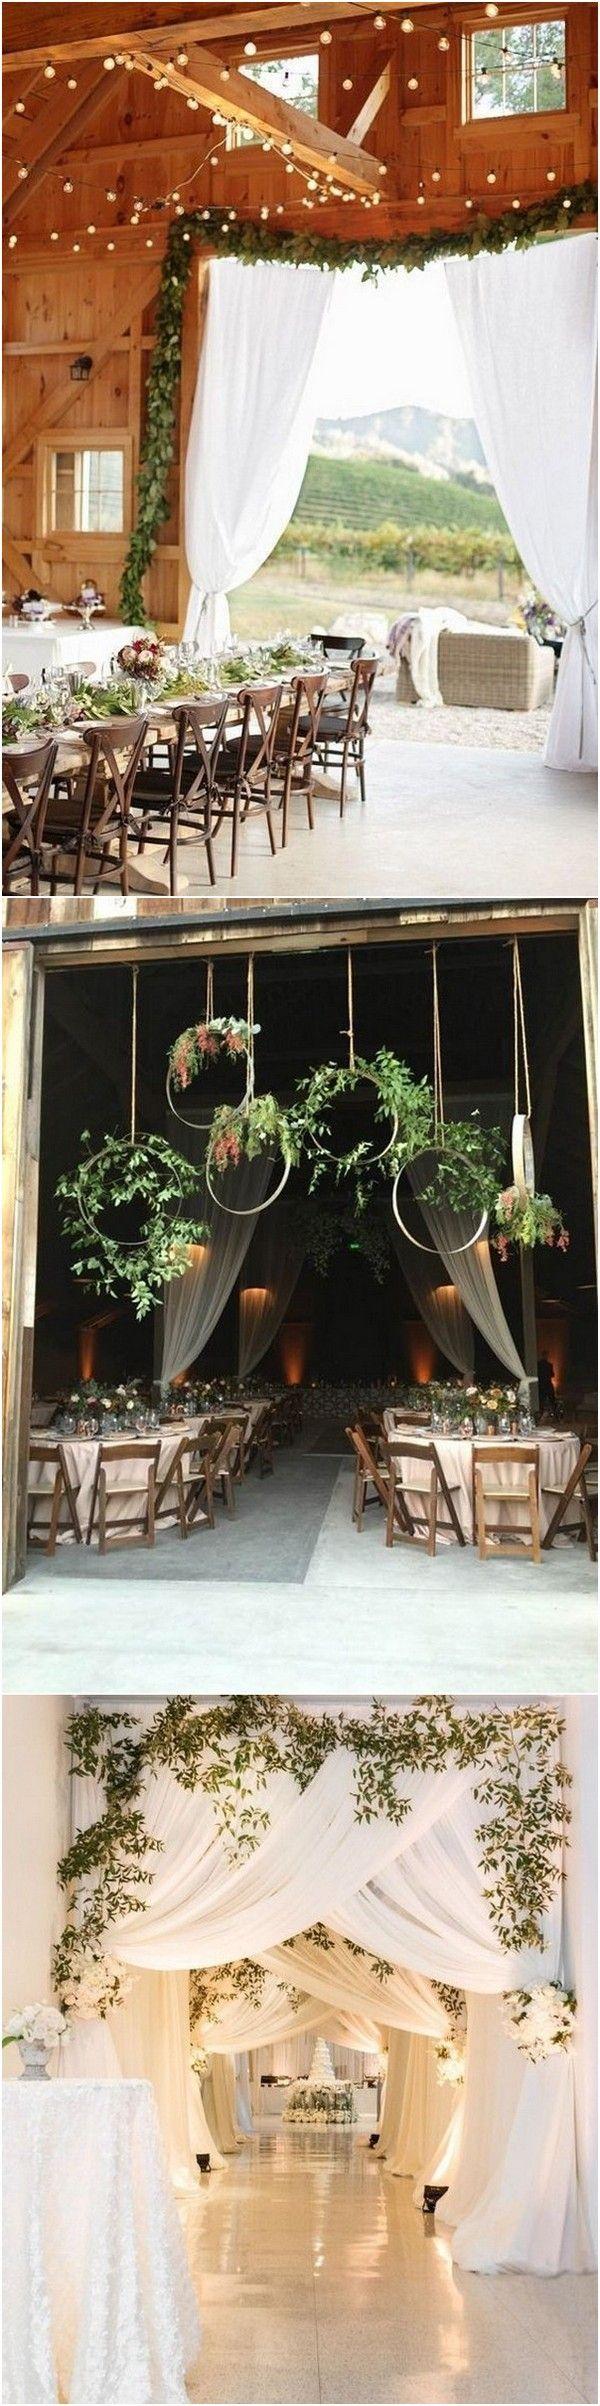 Wedding - Top 20 Wedding Entrance Decoration Ideas For Your Reception - Page 3 Of 3